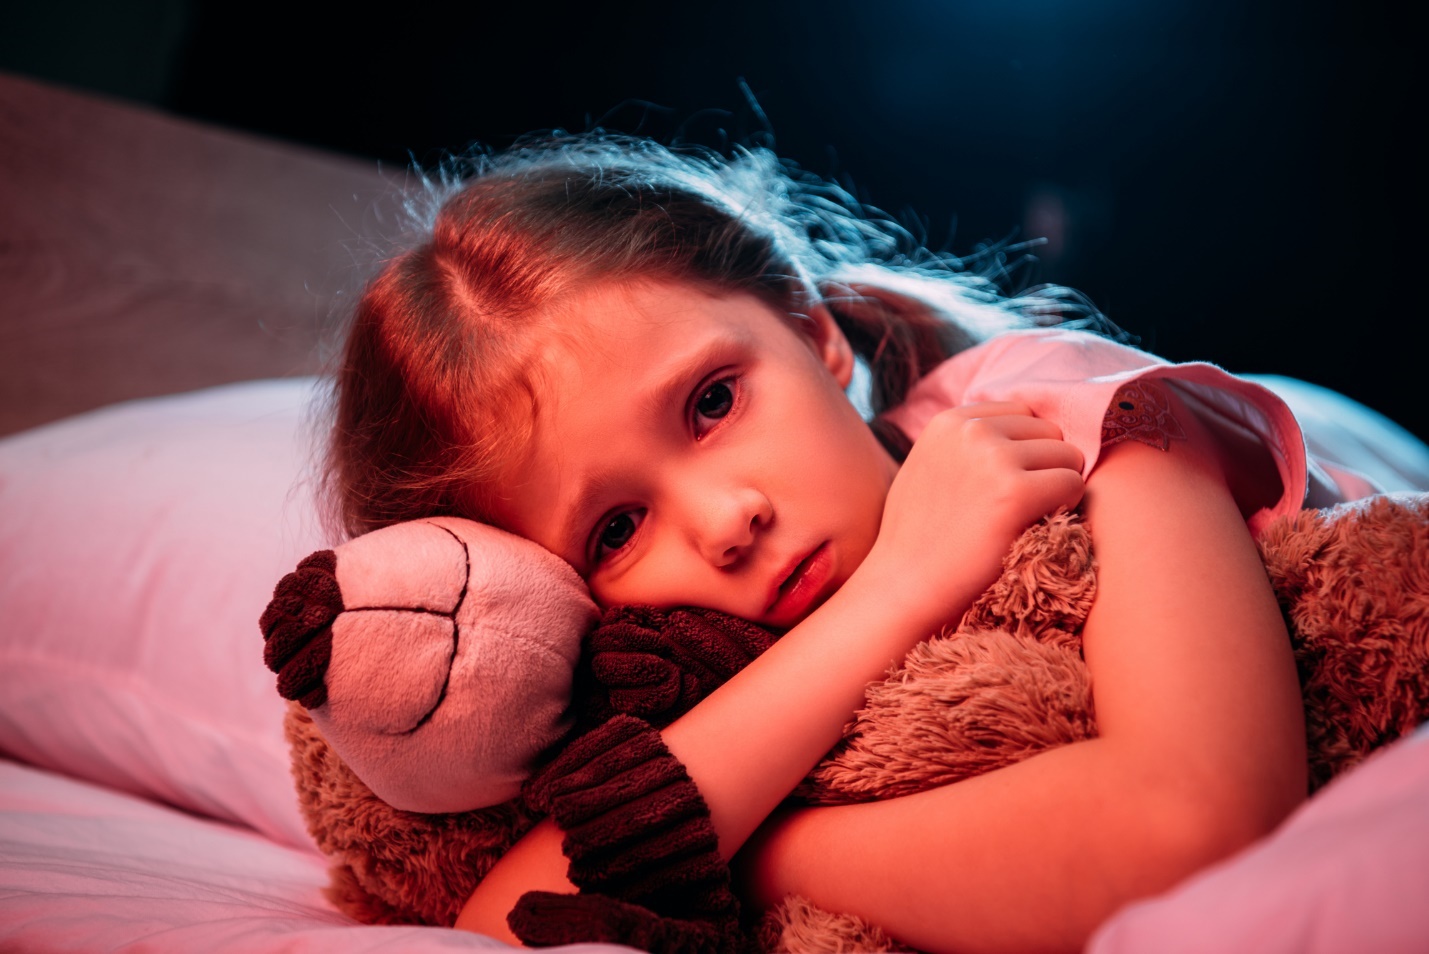 A child lays on a bed with a teddy bear

Description automatically generated with medium confidence